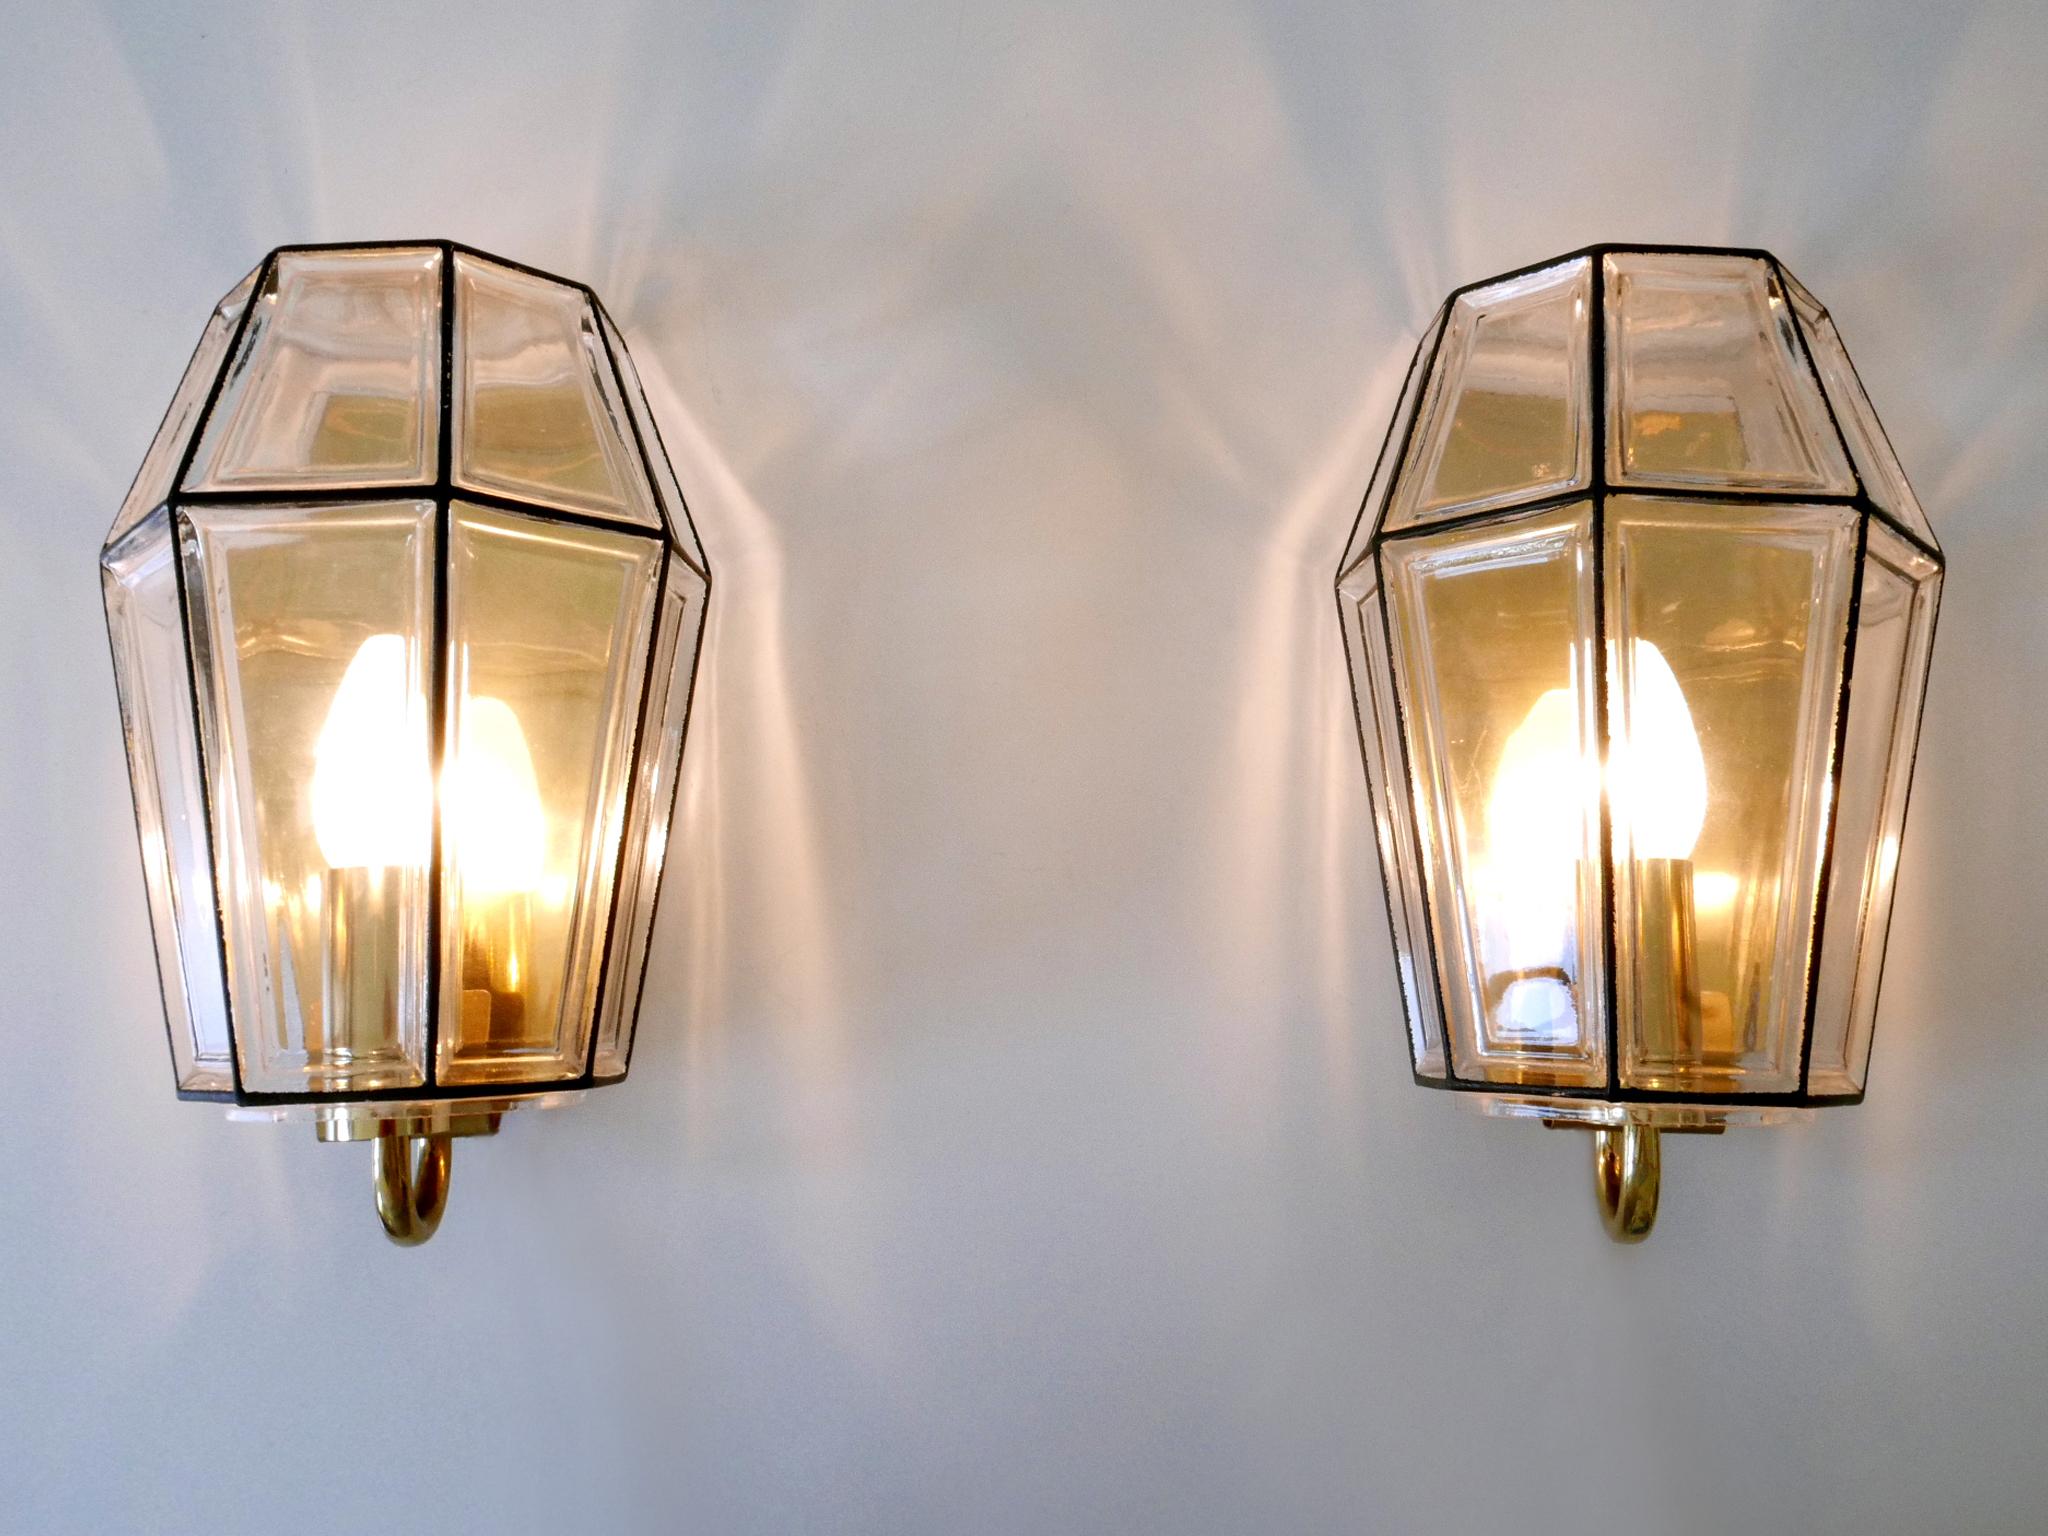 Brass Set of Two Mid-Century Modern Sconces or Wall Fixtures by Glashütte Limburg For Sale